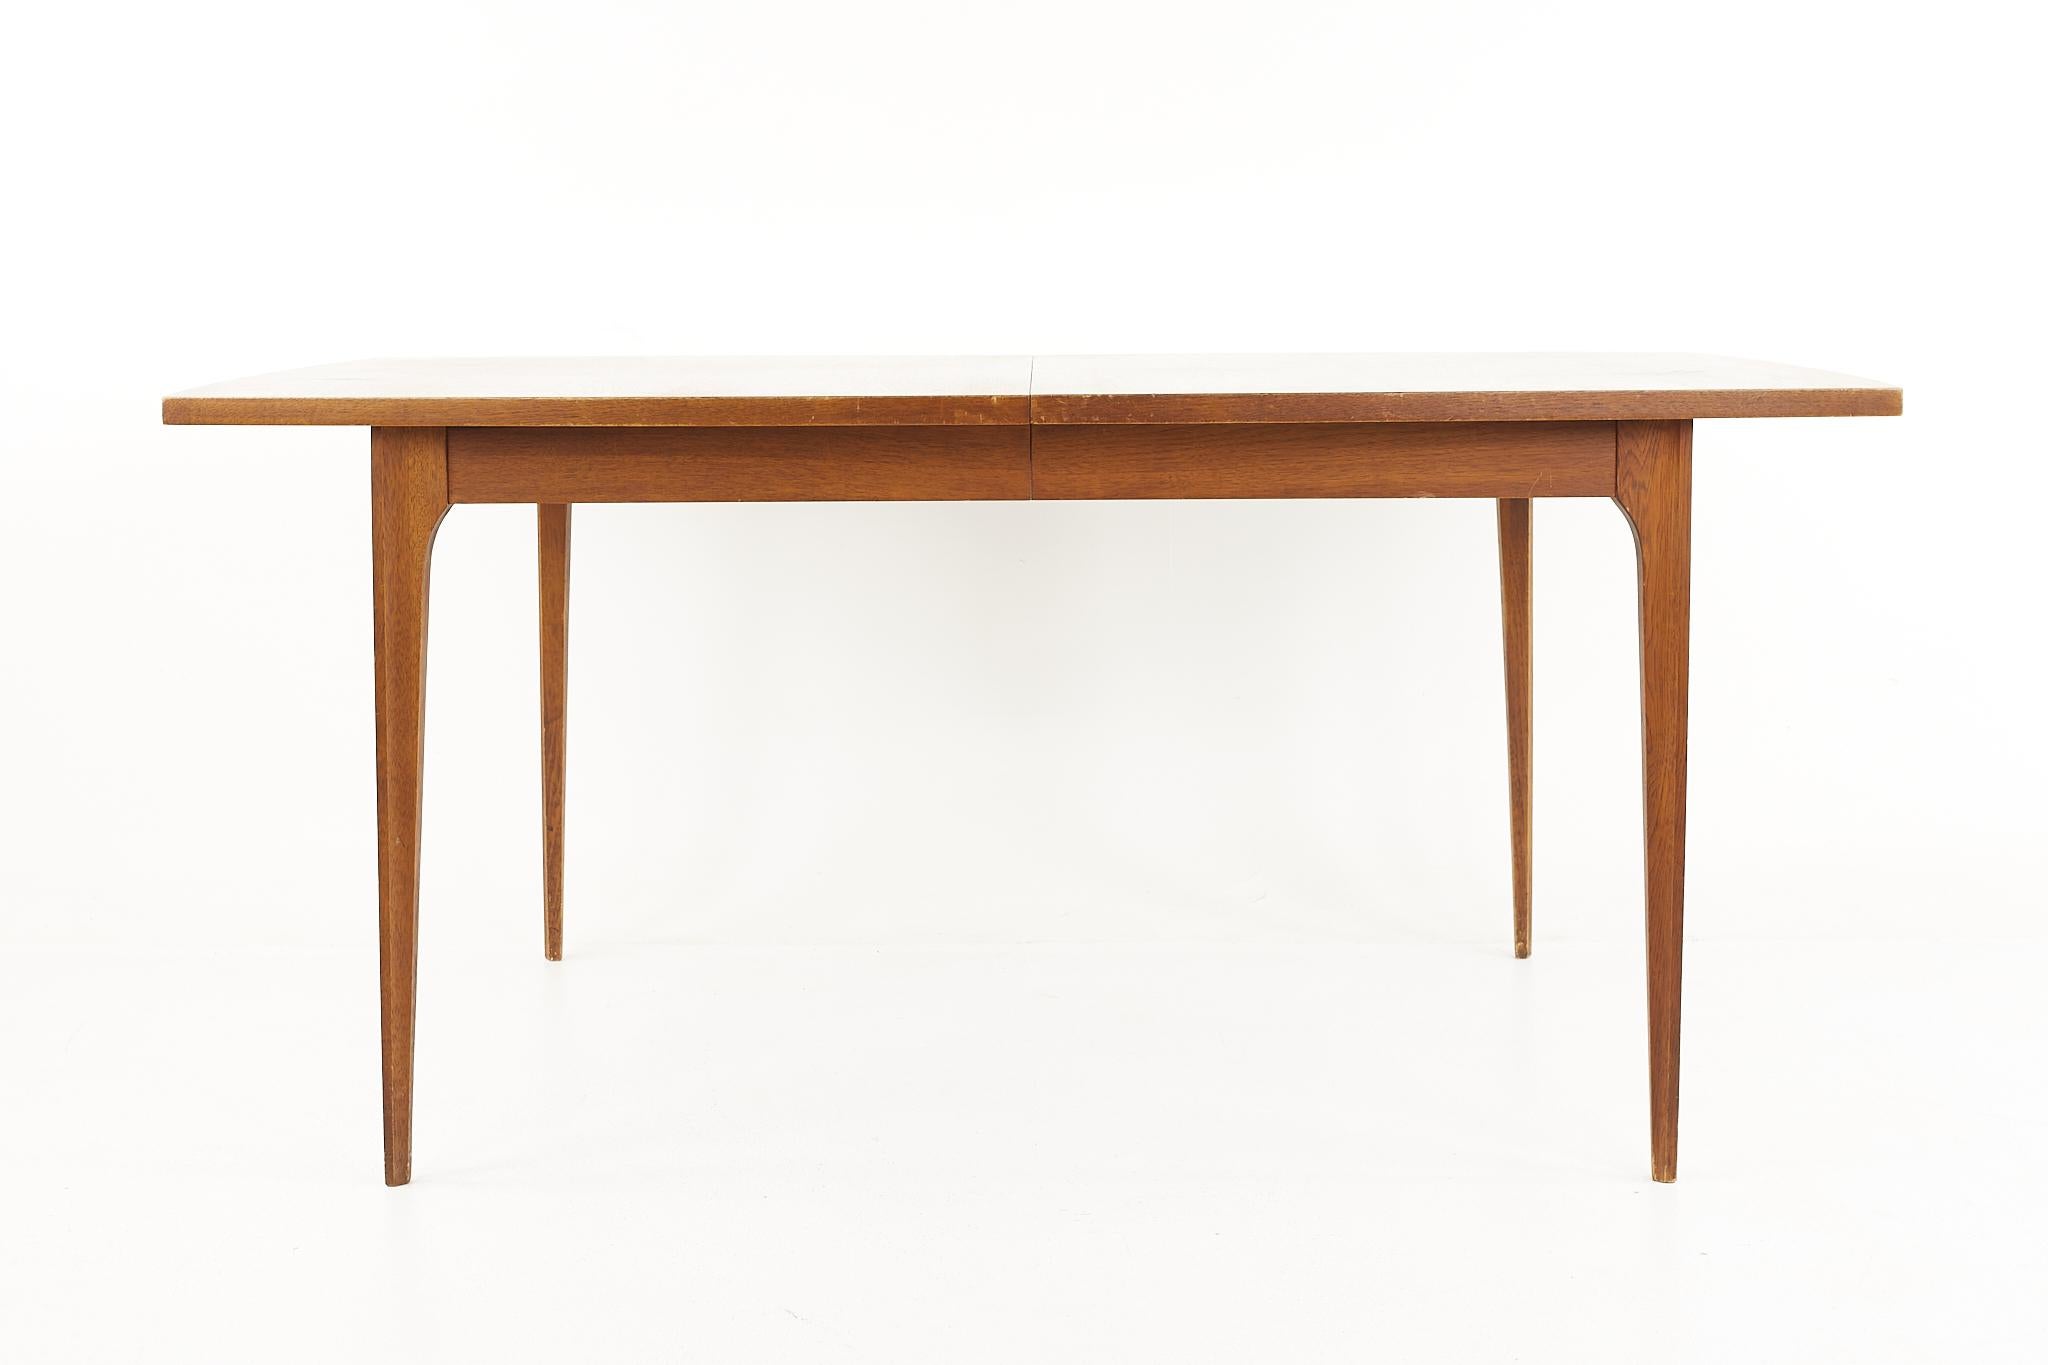 Broyhill Brasilia mid-century walnut surfboard dining table - with one leaf

Table measures: 66 wide x 40 deep x 30 inches high, with a chair clearance of 26 inches, the leaf is 12 wide making a maximum table width of 78 inches

All pieces of